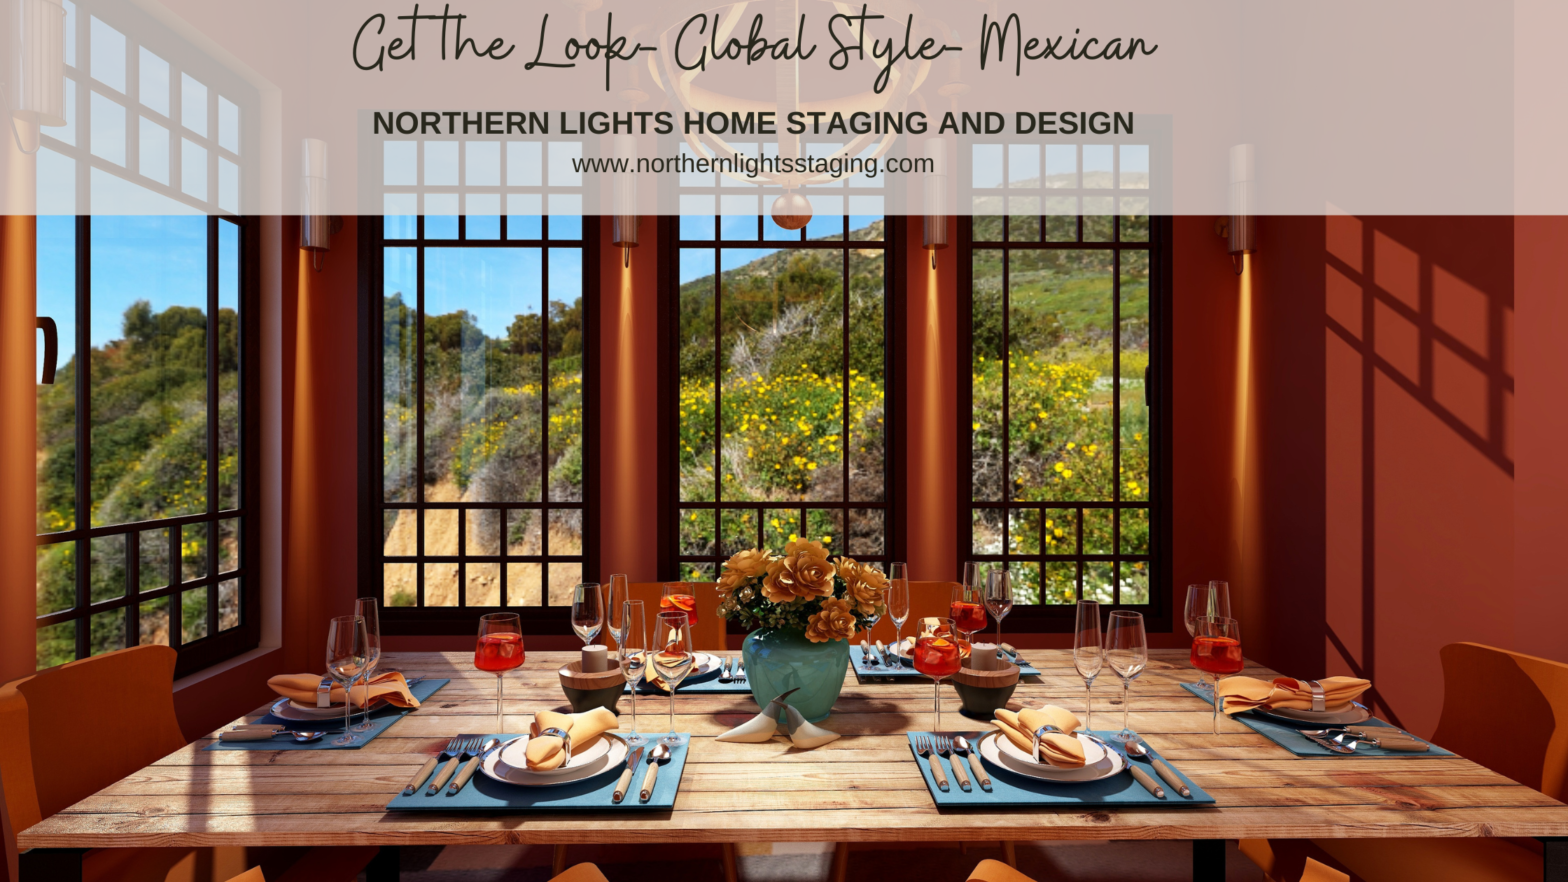 Get the Look- Global Style-Mexican